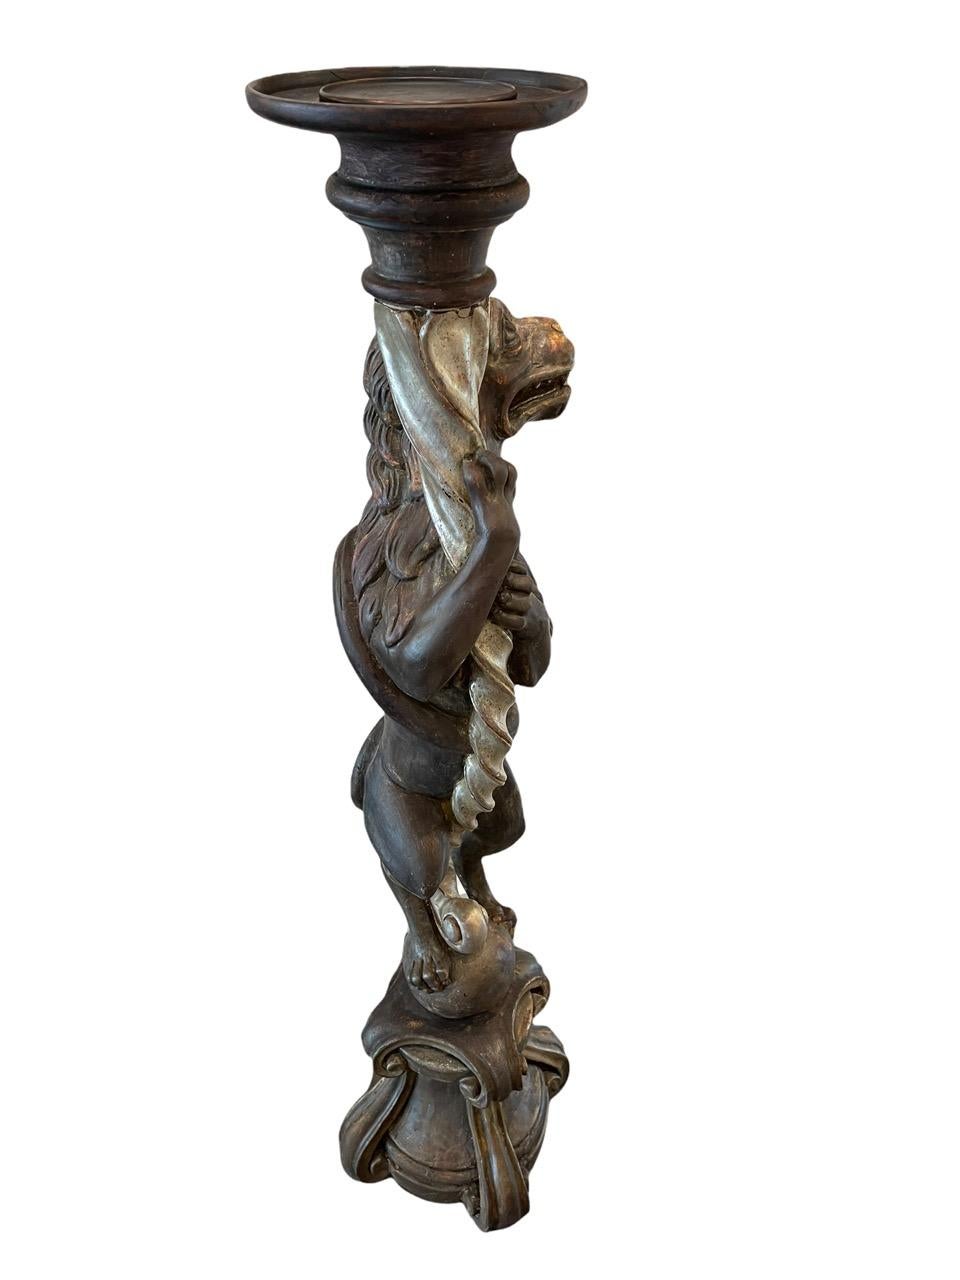 19th Century Russian Empire Carved Wood Candle Holder Sculpture For Sale 14